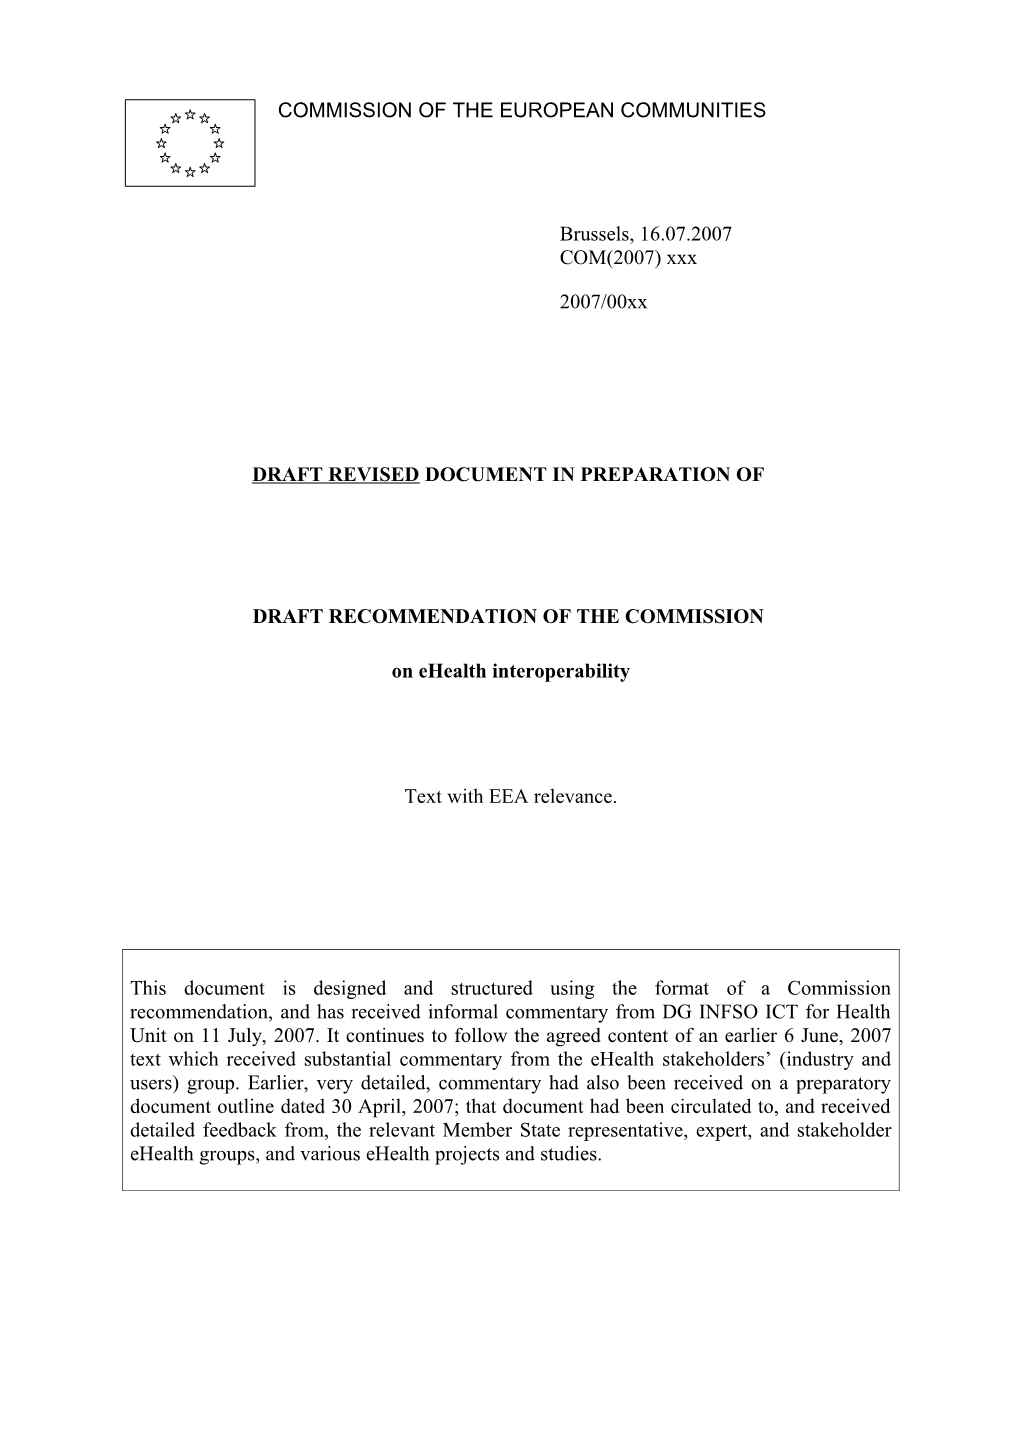 Draft Revised Document in Preparation of Draft Recommendation of the Commission